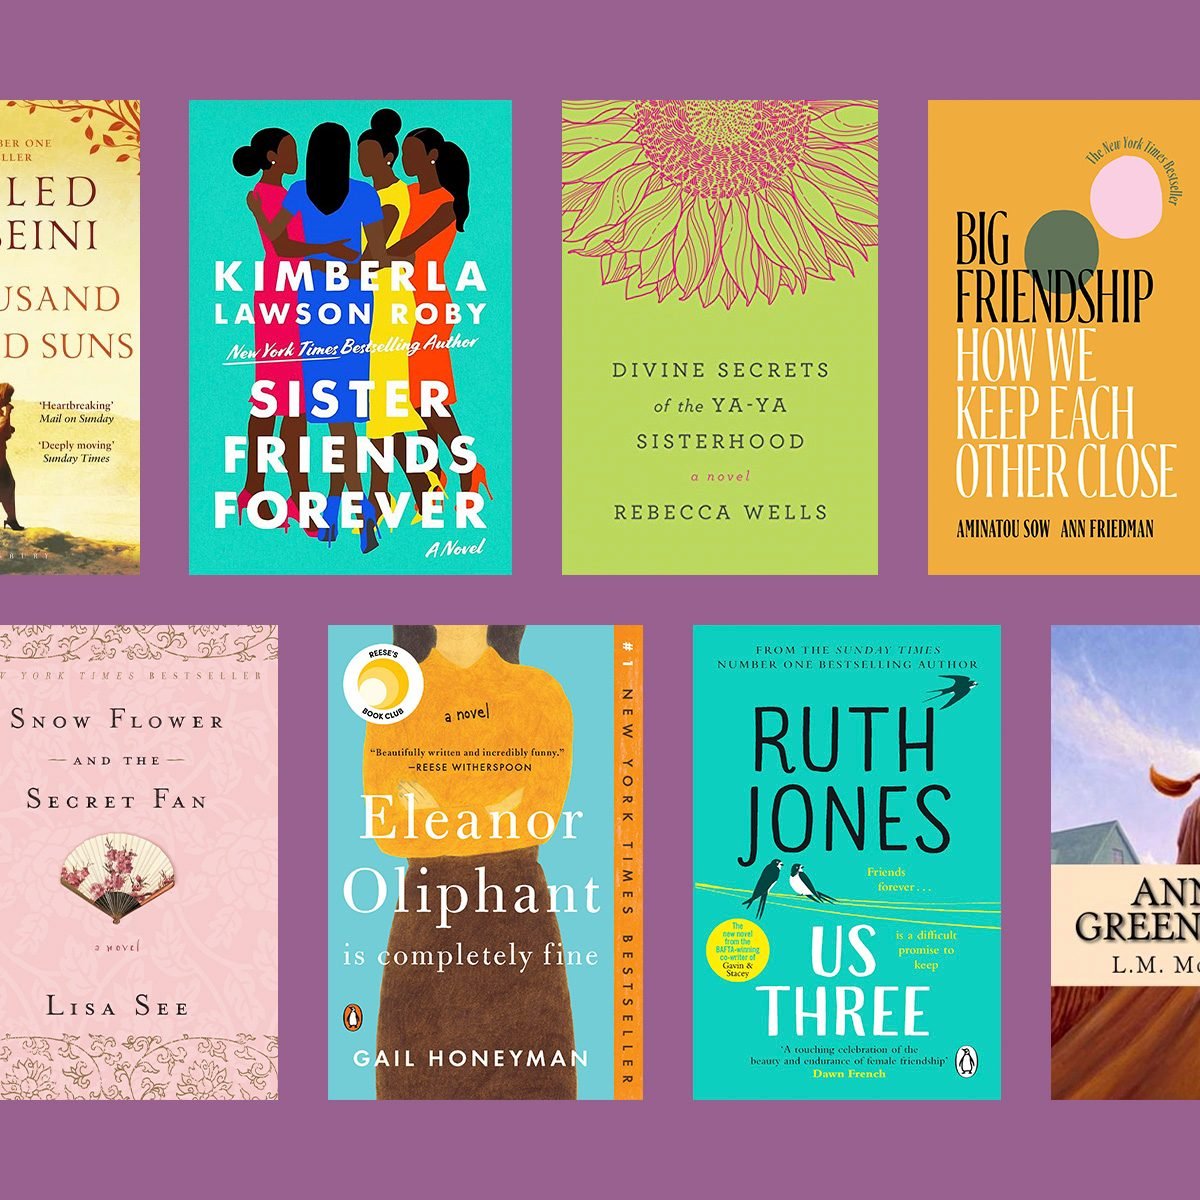 19 Books About Friendship FT ?w=1200